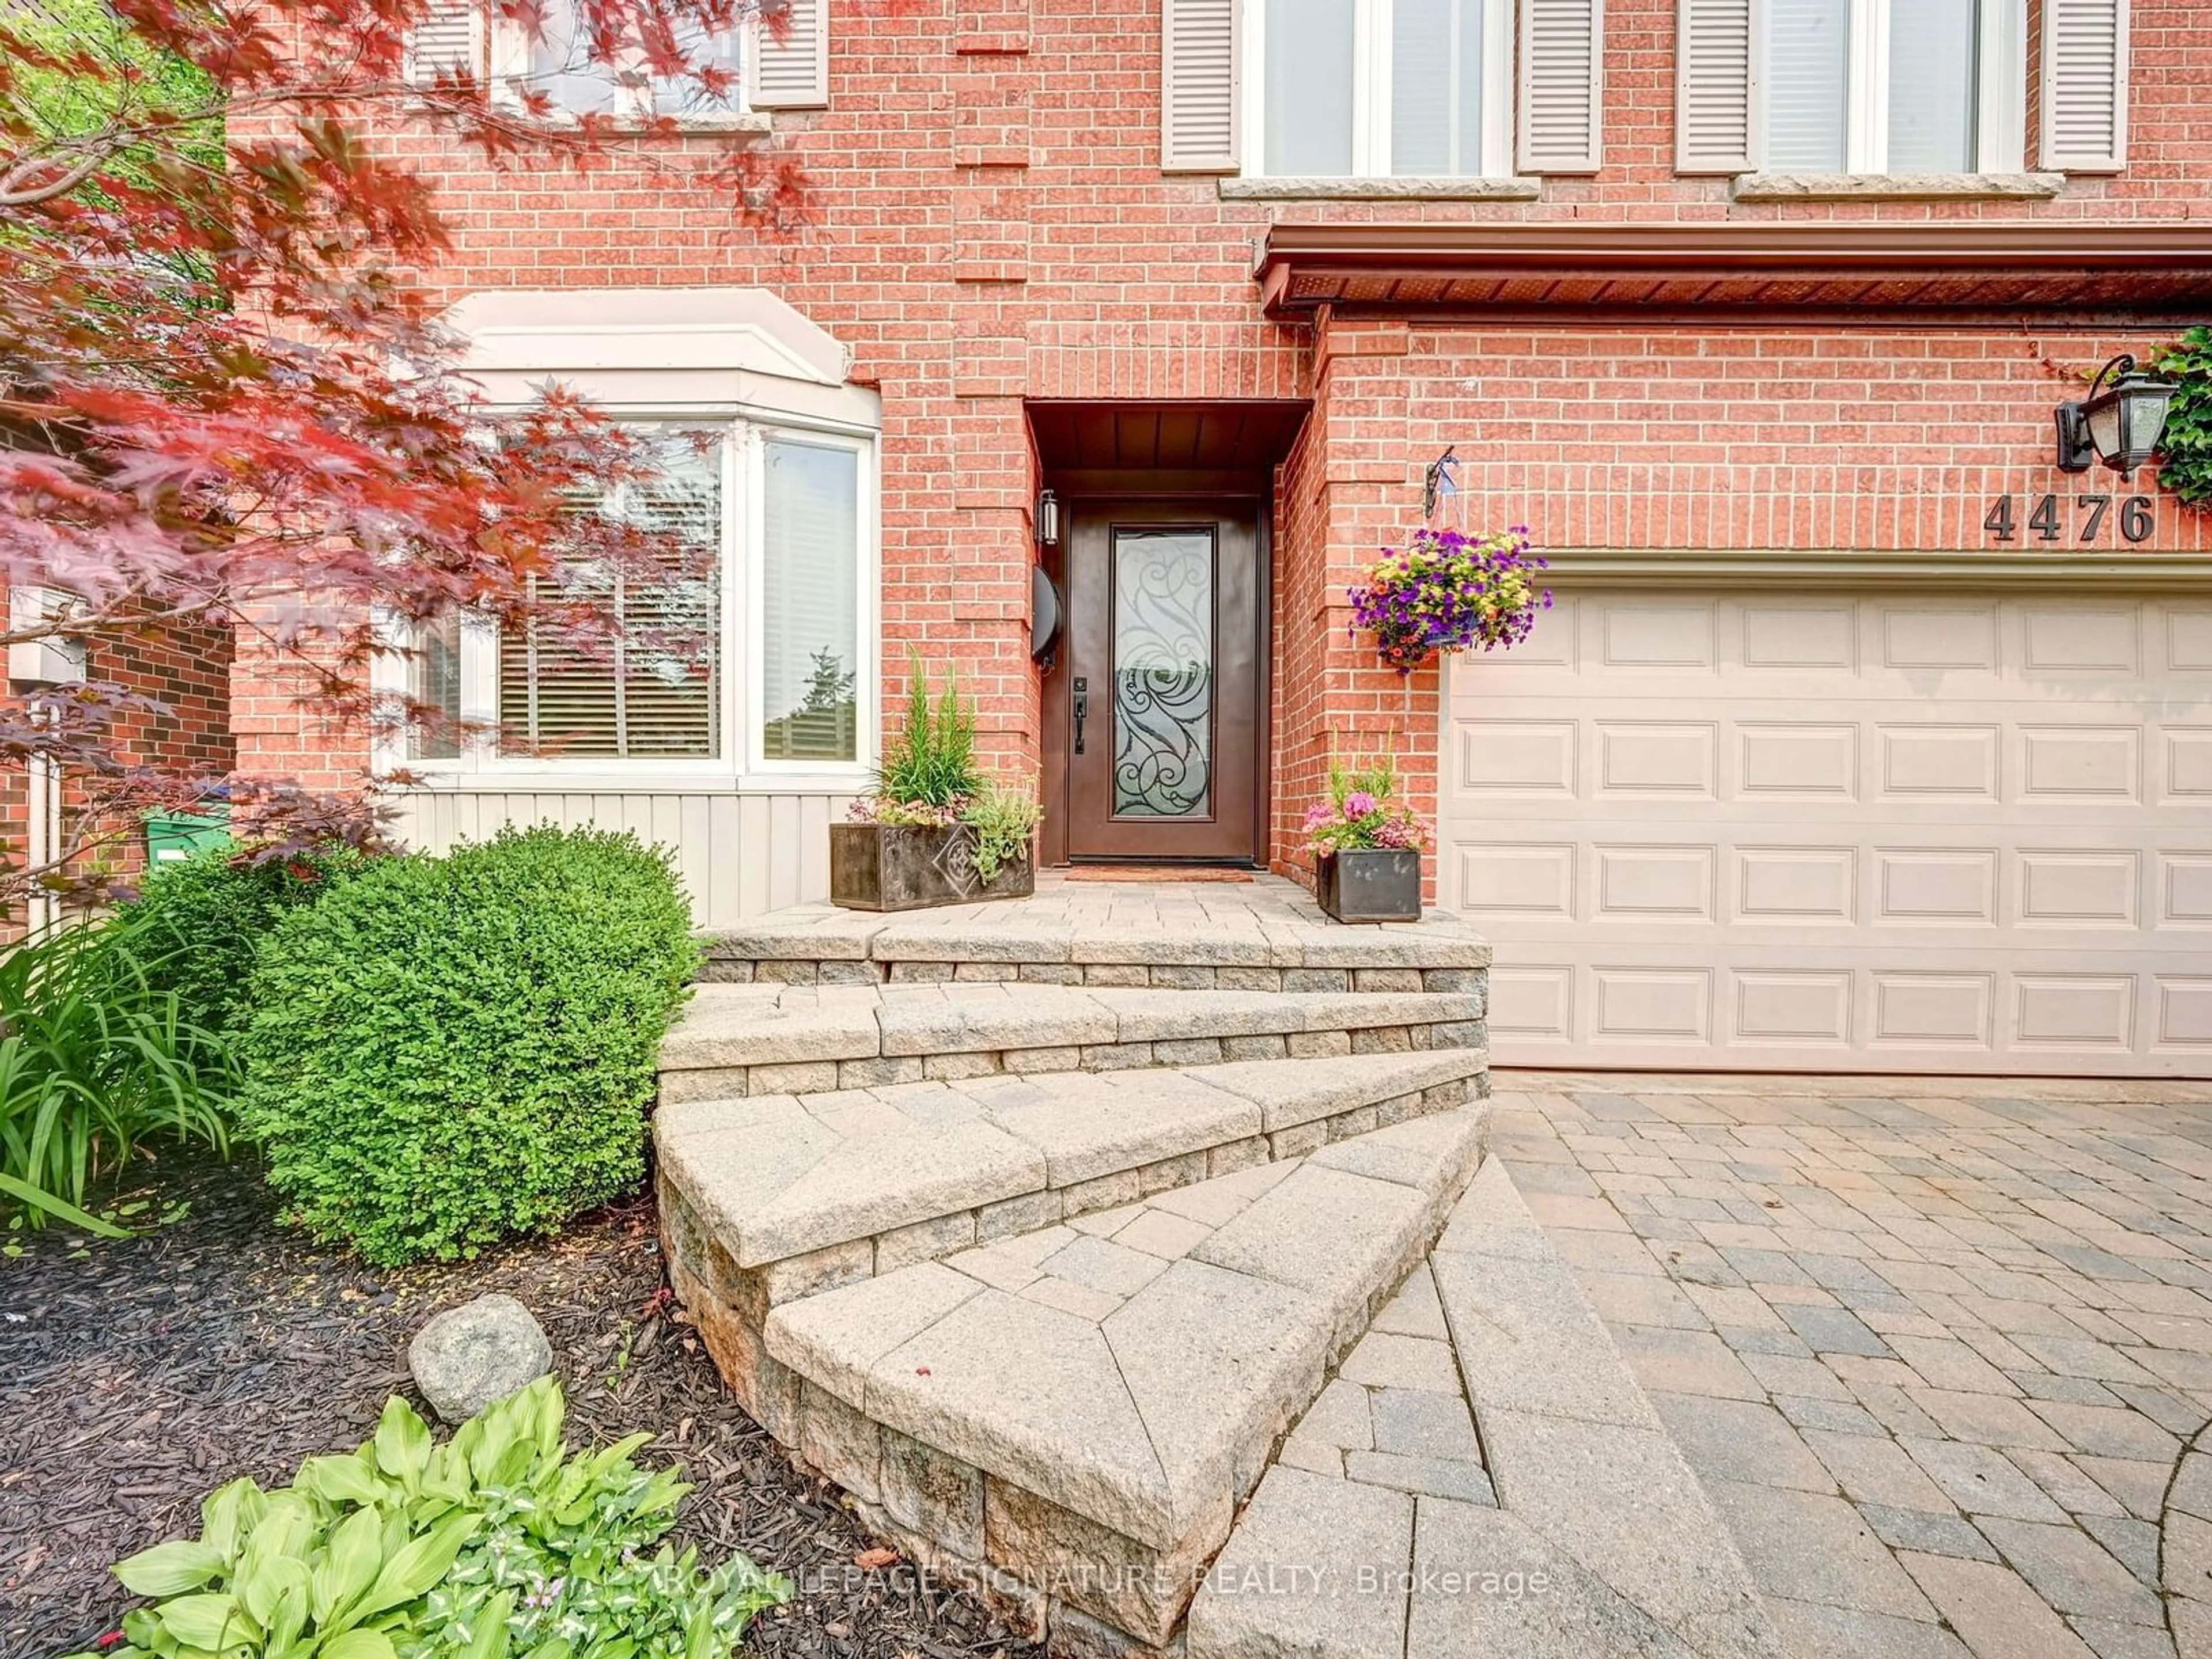 Home with brick exterior material for 4476 Sawmill Valley Dr, Mississauga Ontario L5L 3N2